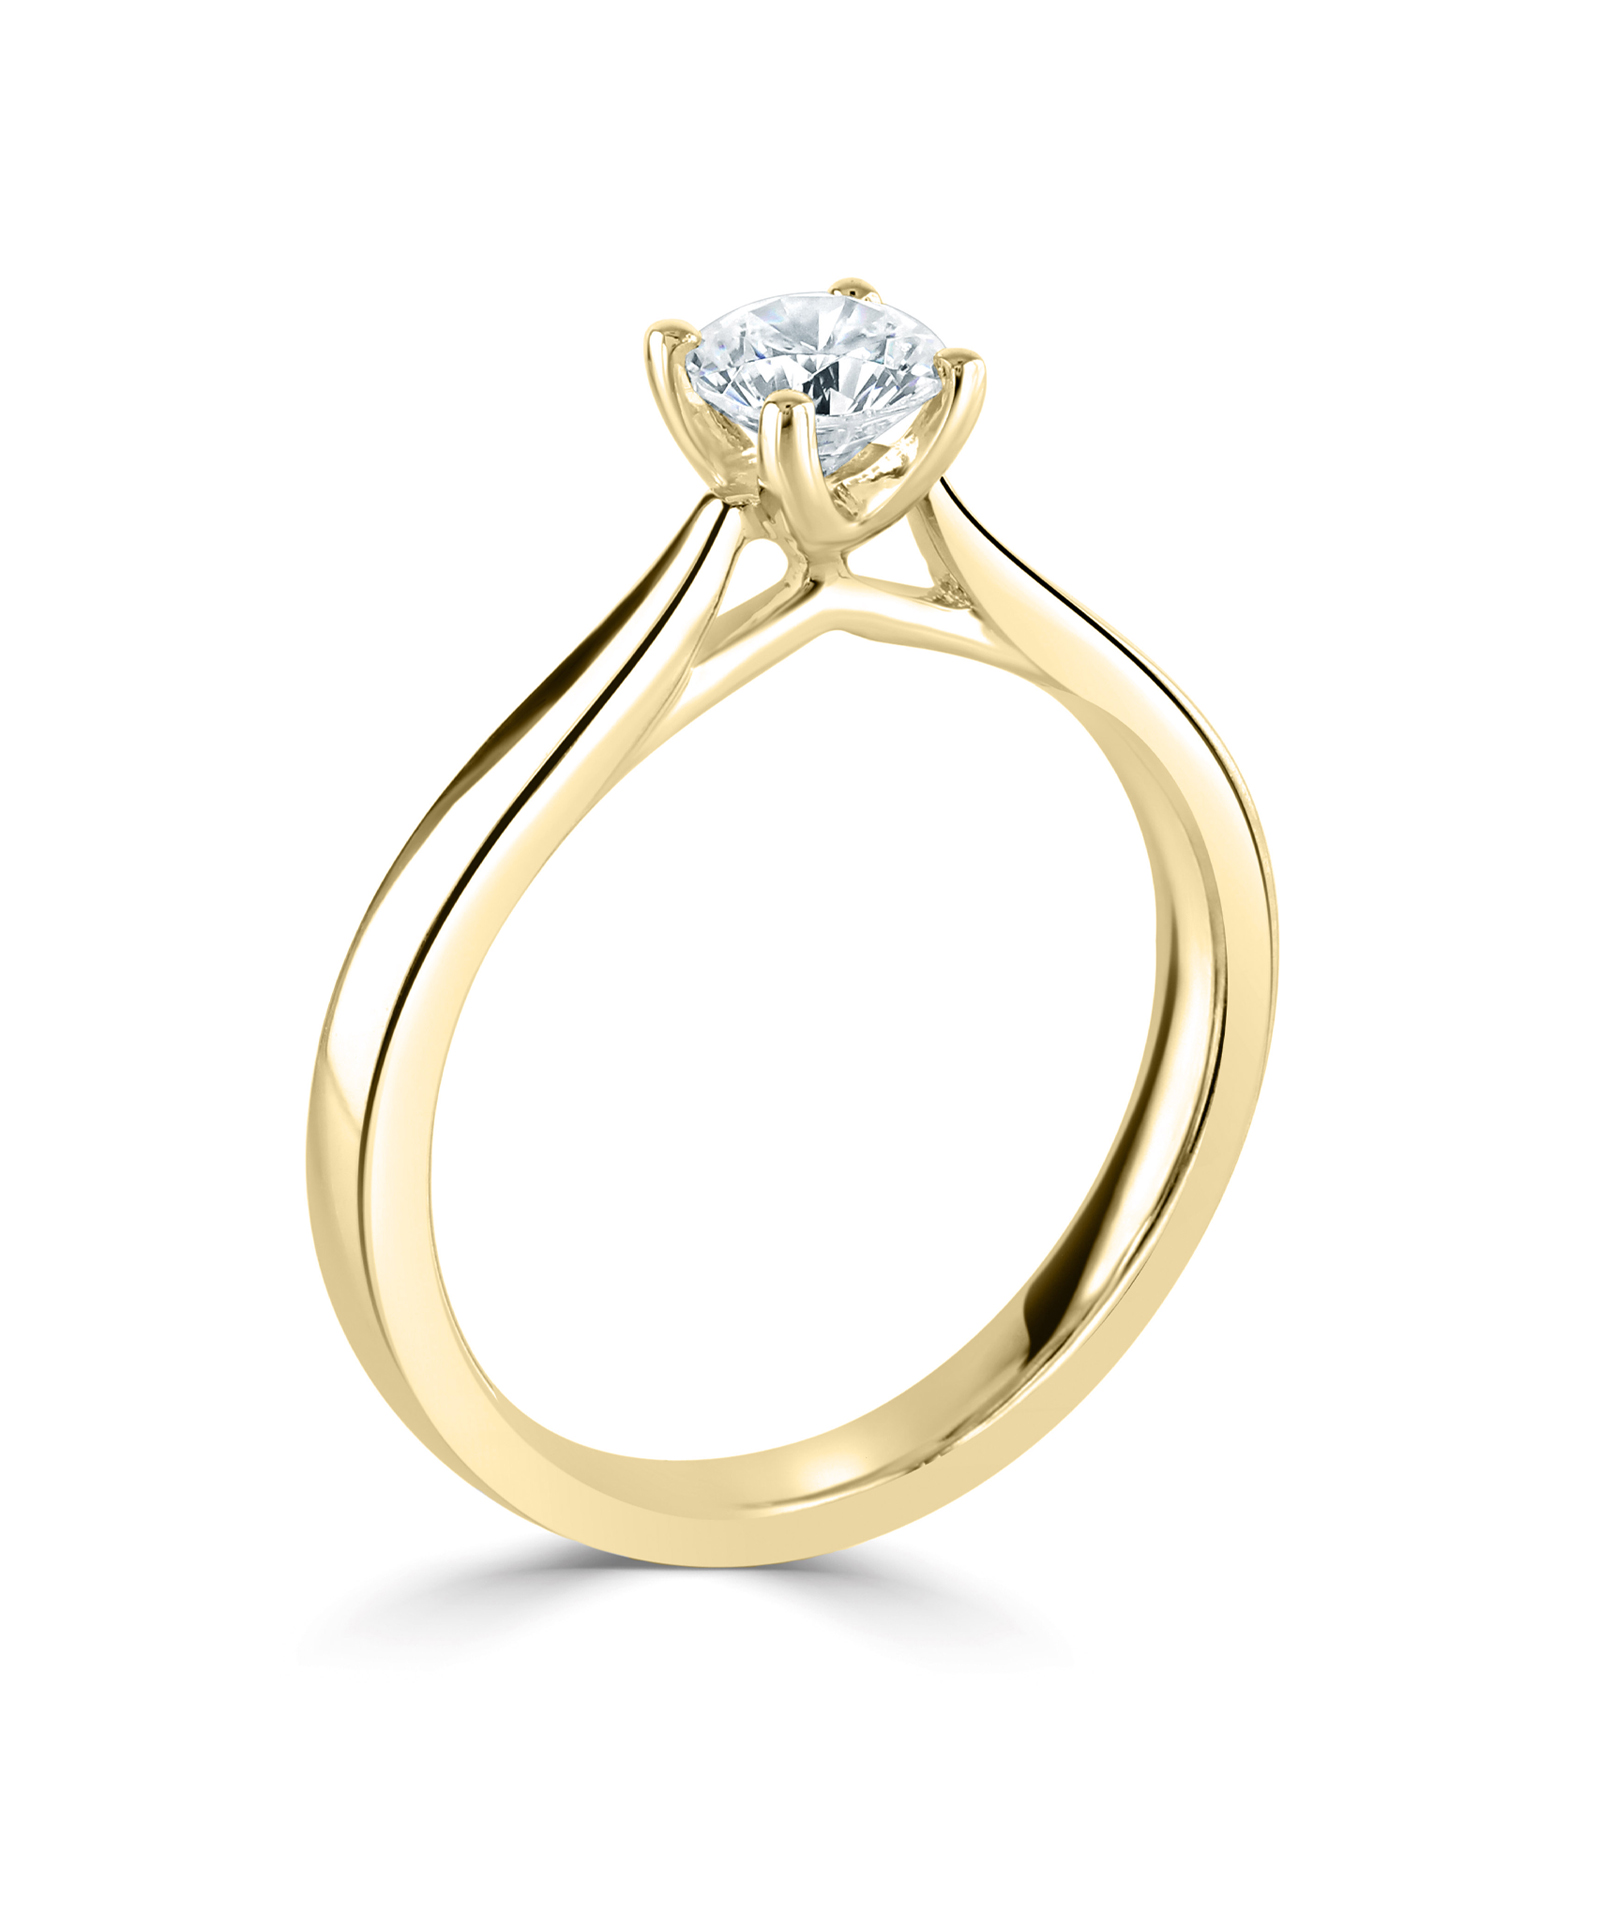 1ct Round Brilliant Yellow Gold Diamond Ring with Cathedral Setting - Phillip Stoner The Jeweller